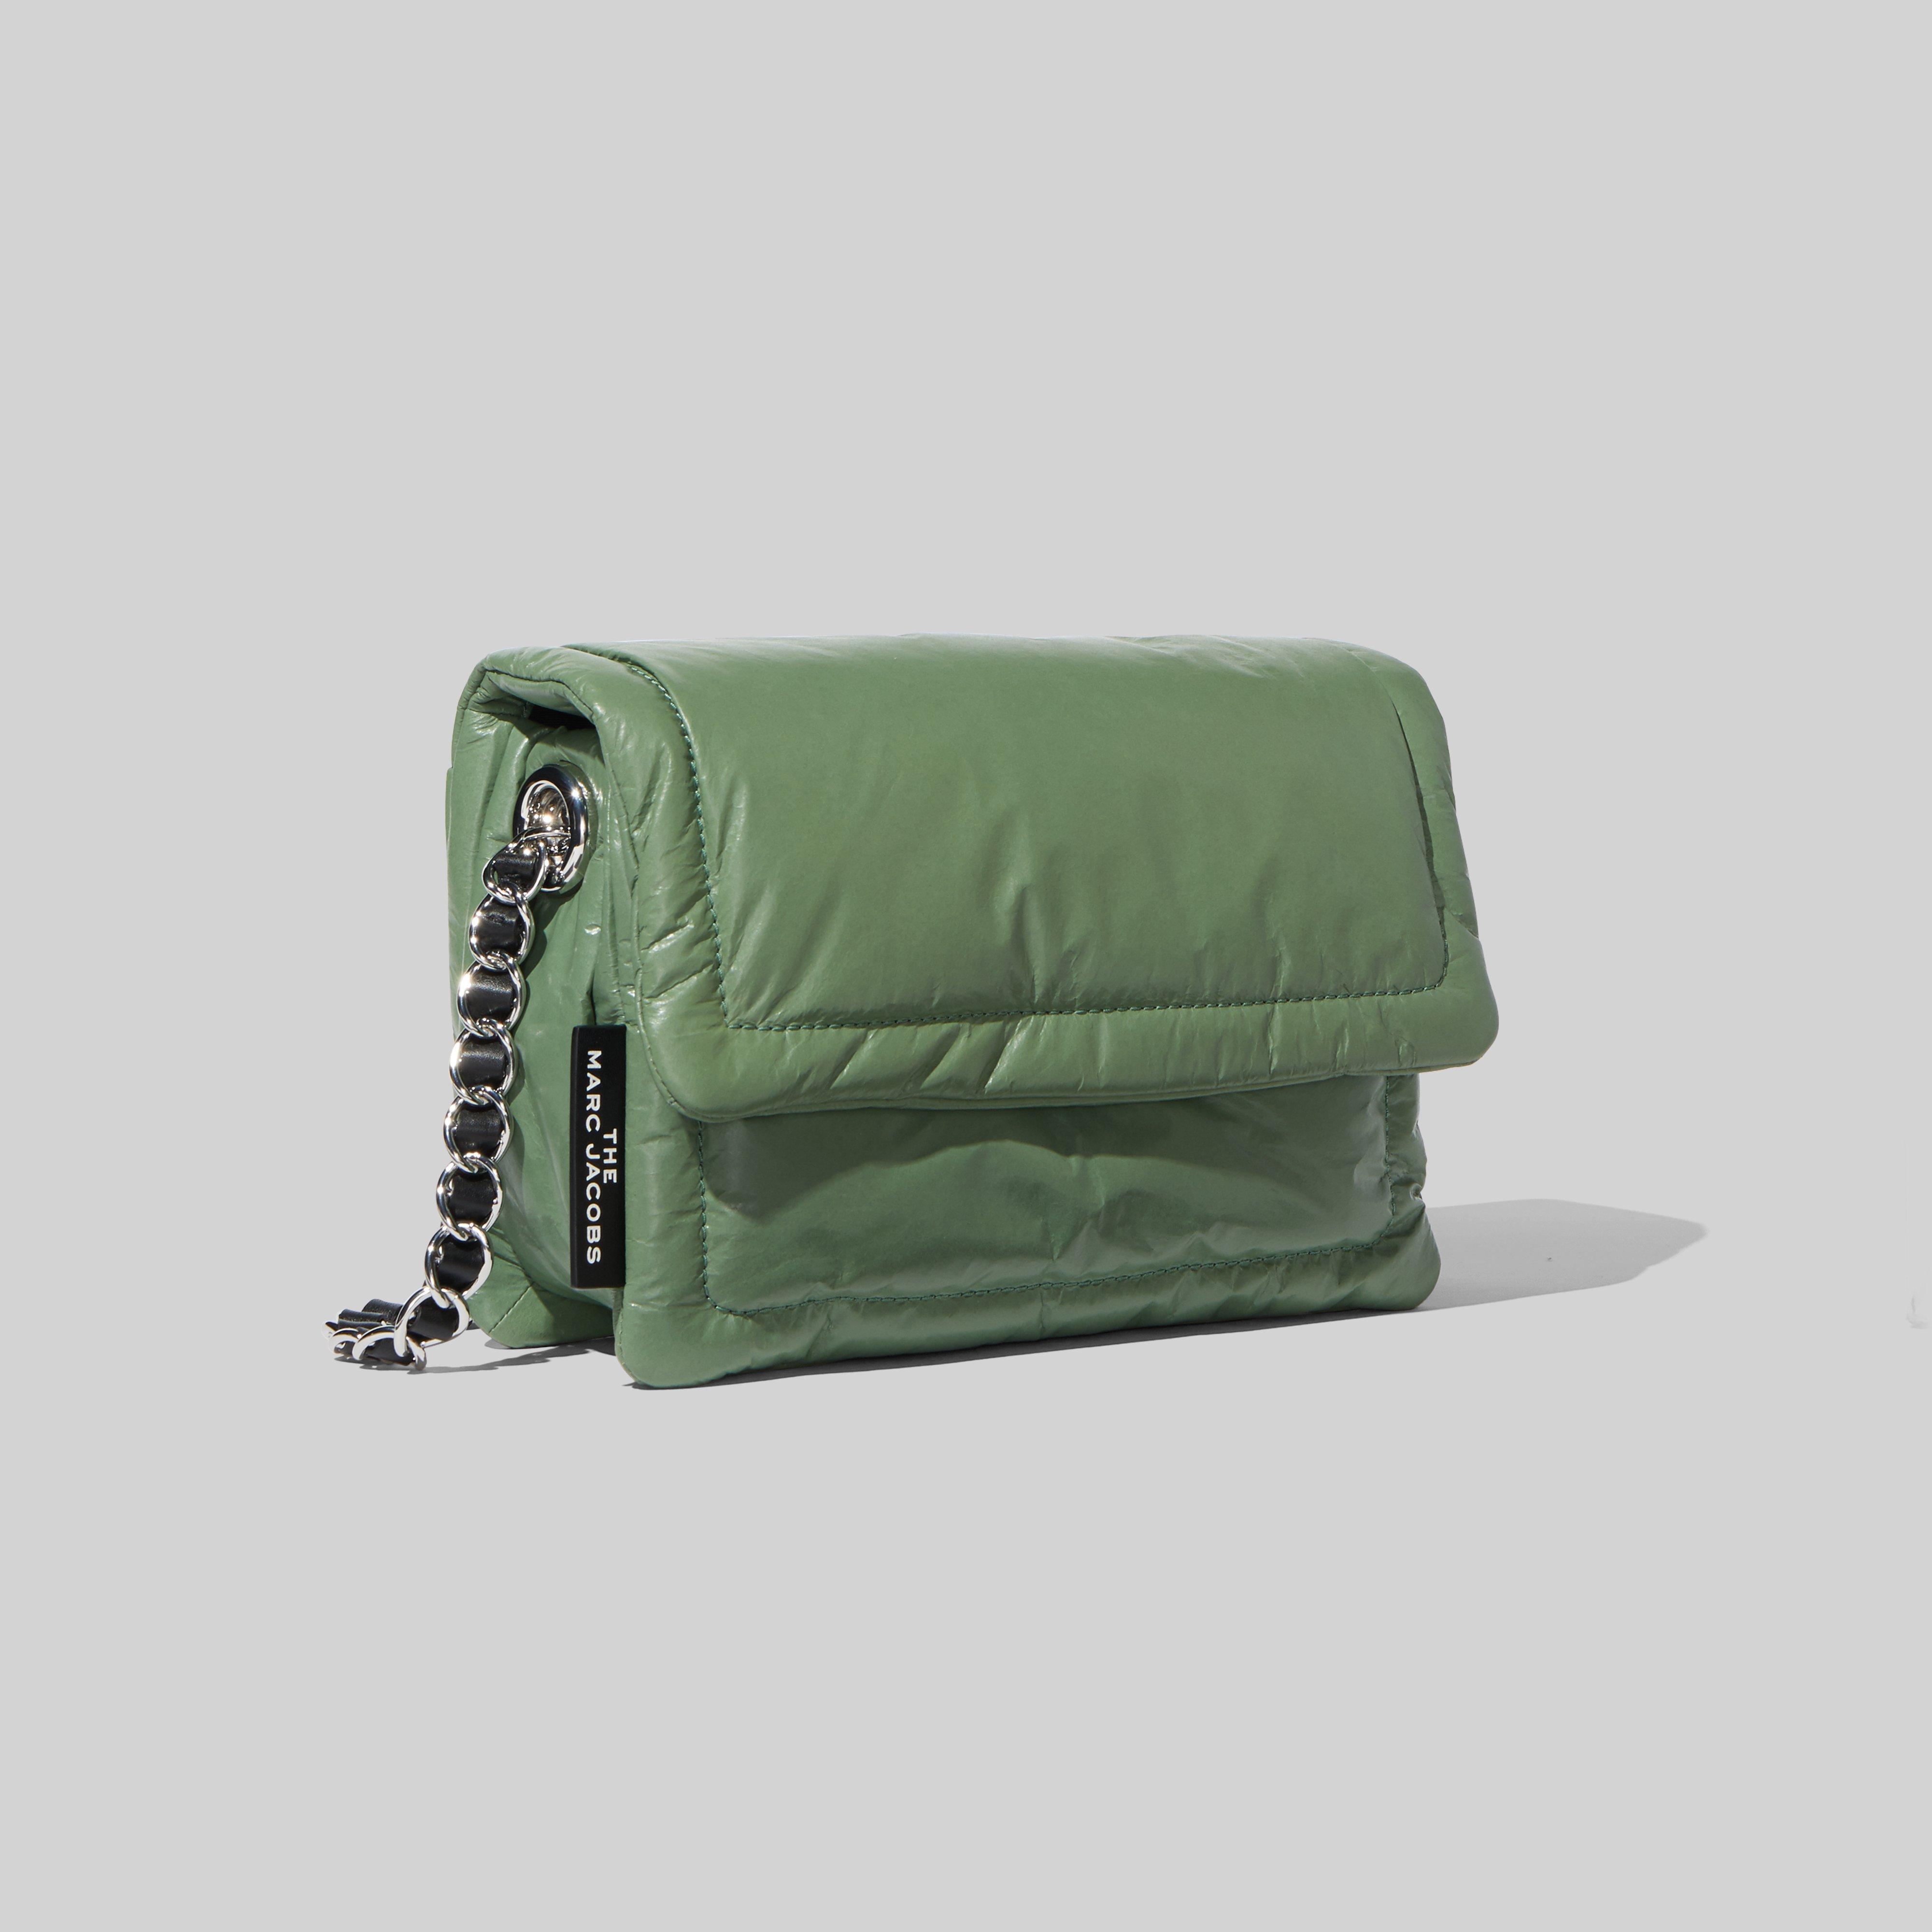 Marc Jacobs The Pillow Bag in Green